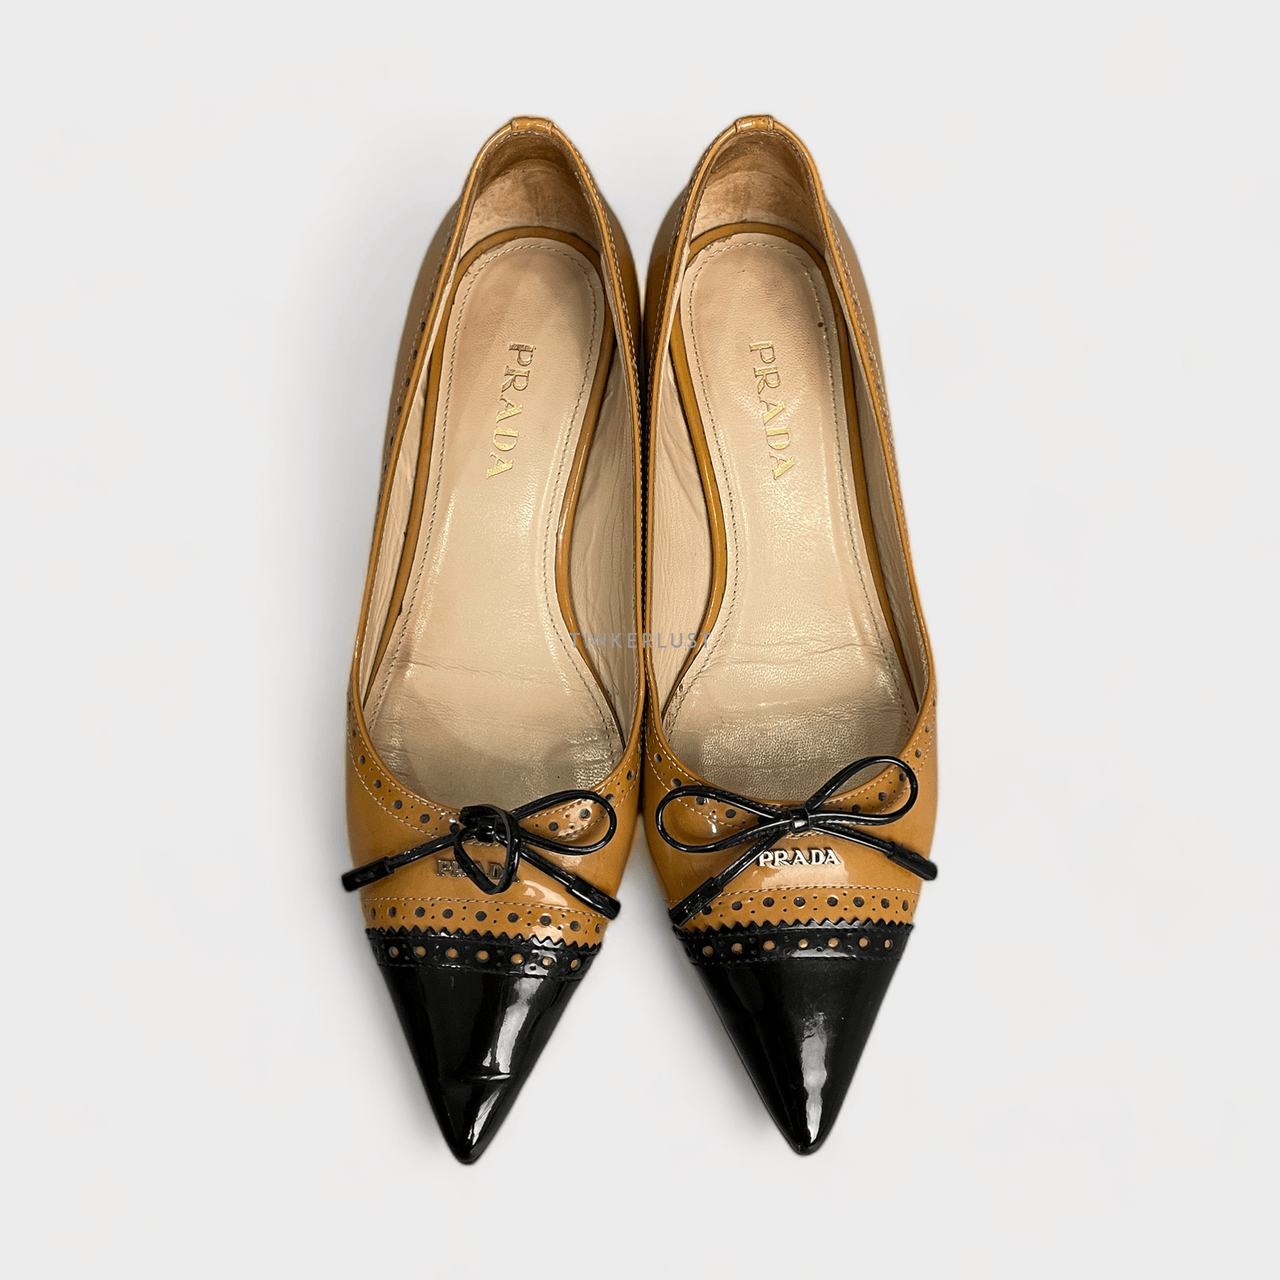 Prada Bow Pointed Toe Brown Patent Flats